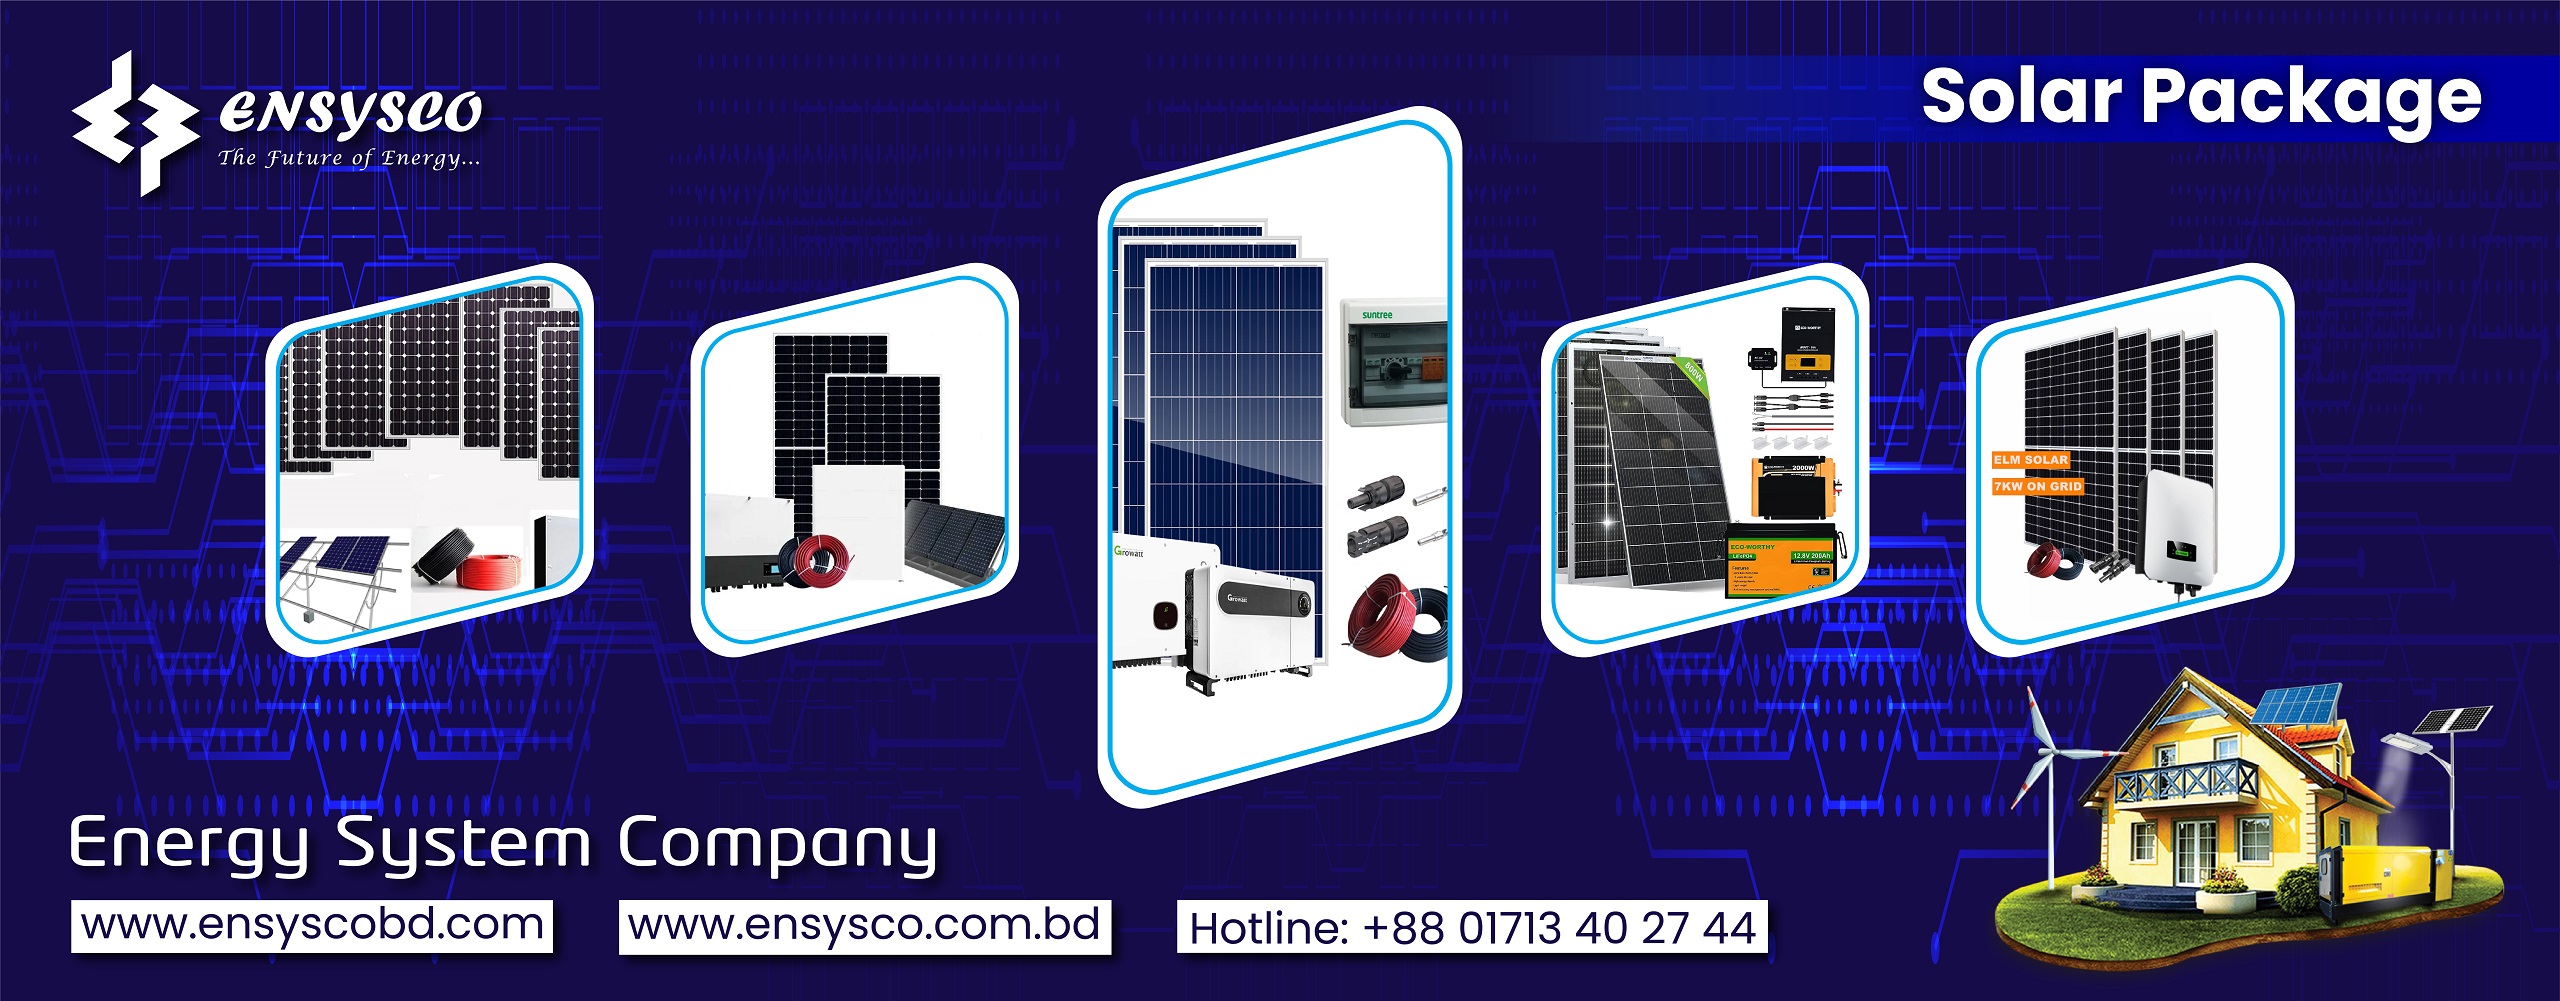 Solar Package Price in Bangladesh